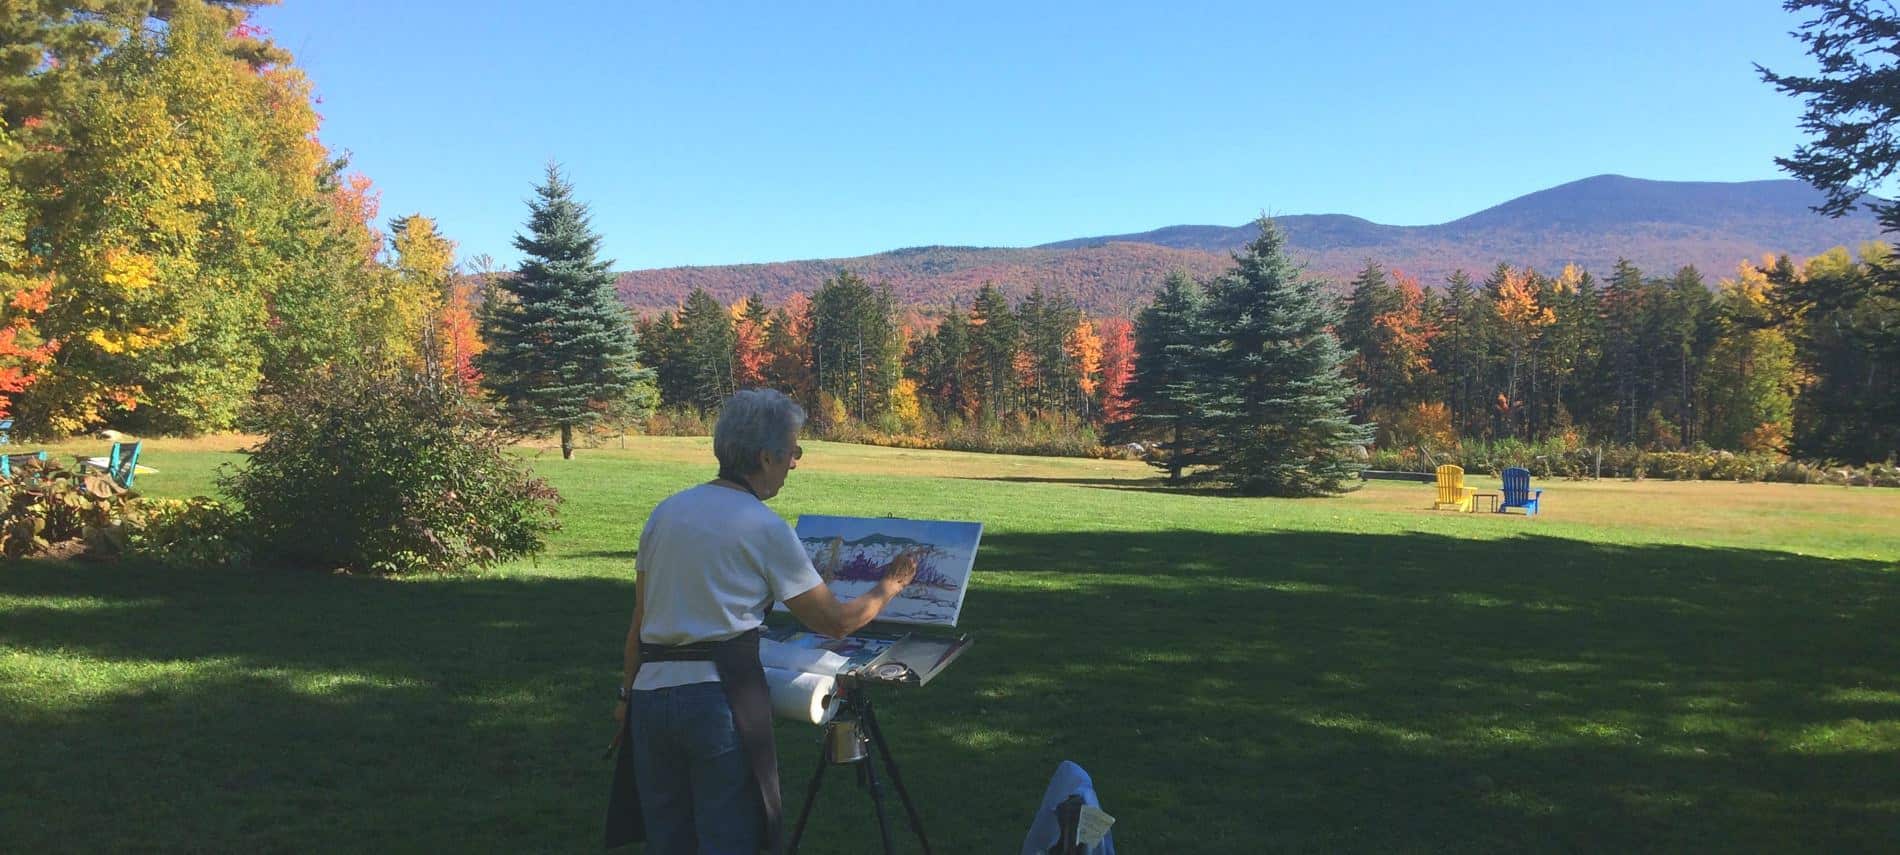 Person standing outside in the grass painting the view of green grass, colorful trees in the fall and distant hills